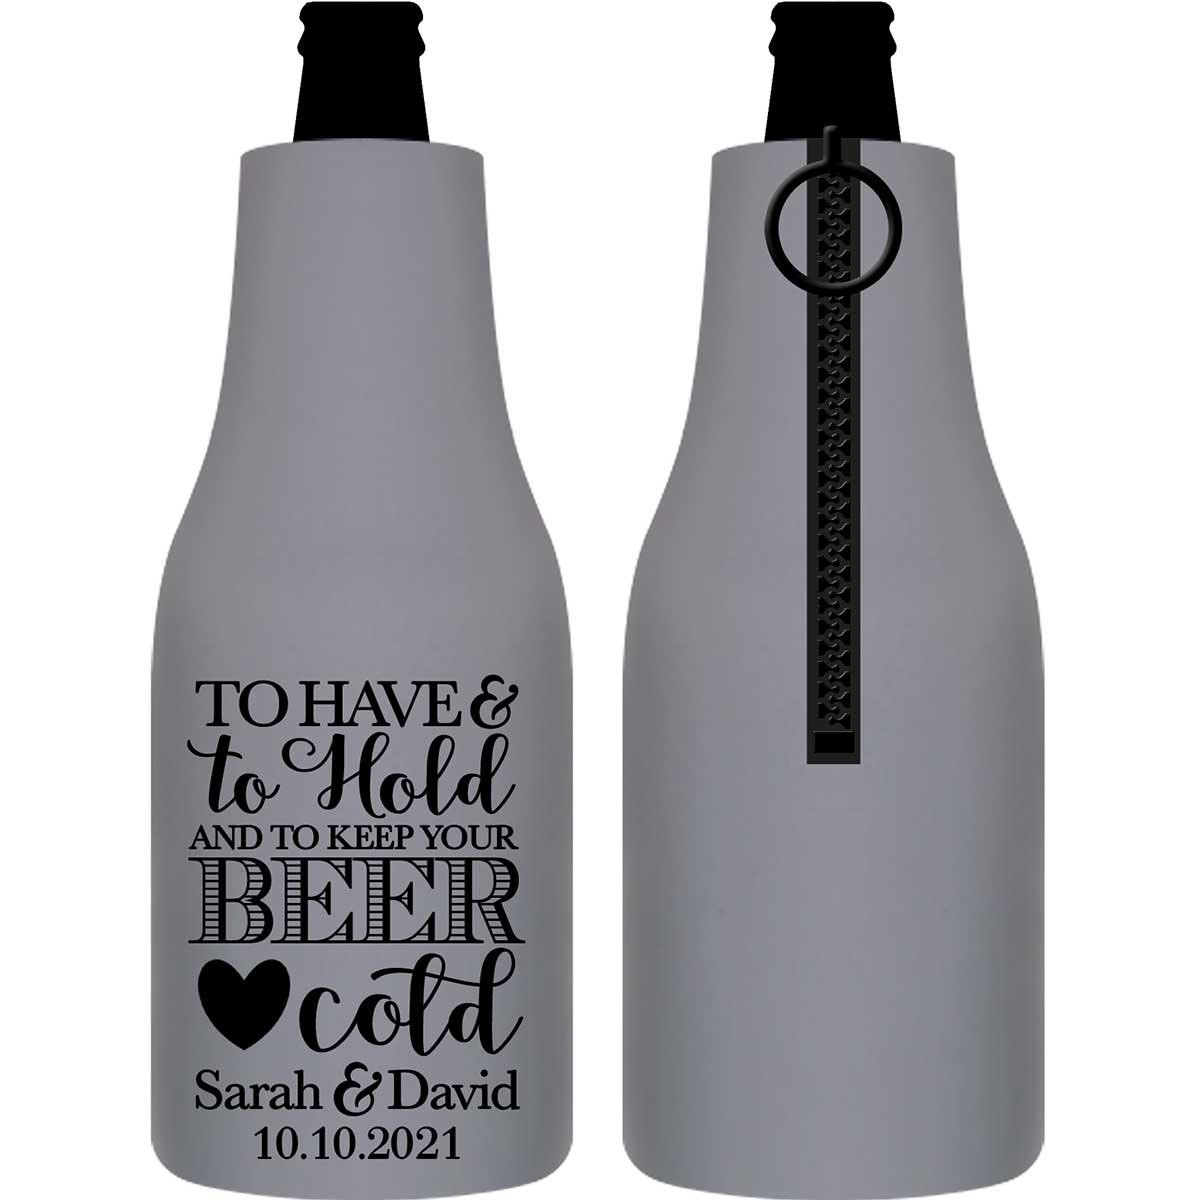 https://www.thatweddingshop.com/wp-content/uploads/2020/01/To-Have-And-To-Hold-Keep-Your-Beer-Cold-1A-Collapsible-Foam-Zippered-Bottle-Koozies-Personalized-Wedding-Favors.jpg